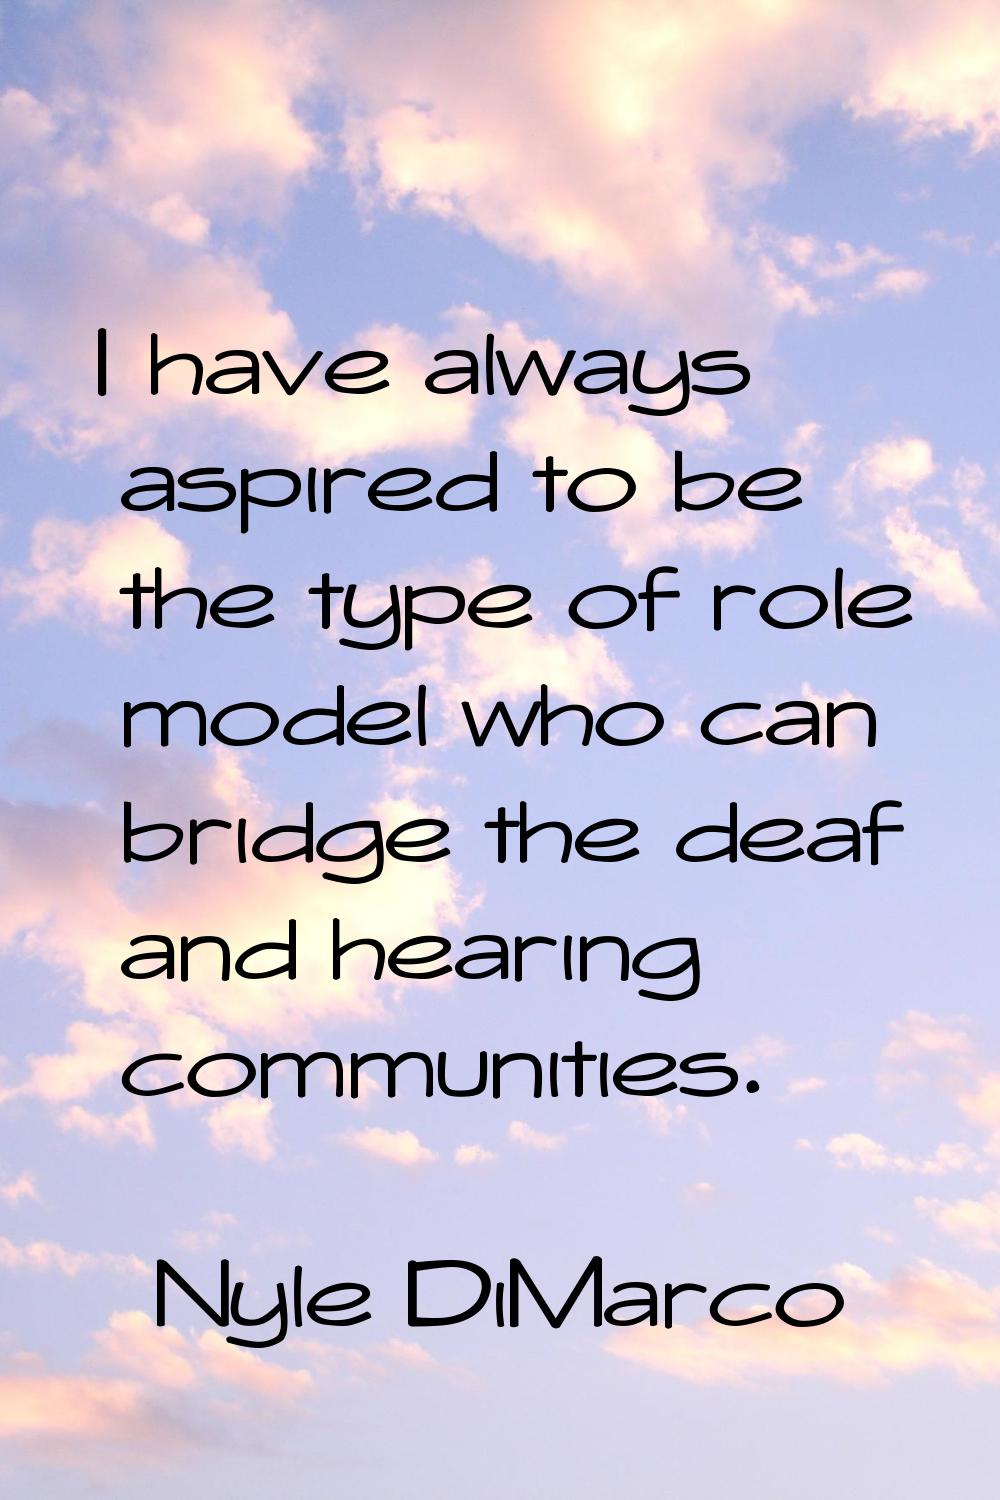 I have always aspired to be the type of role model who can bridge the deaf and hearing communities.